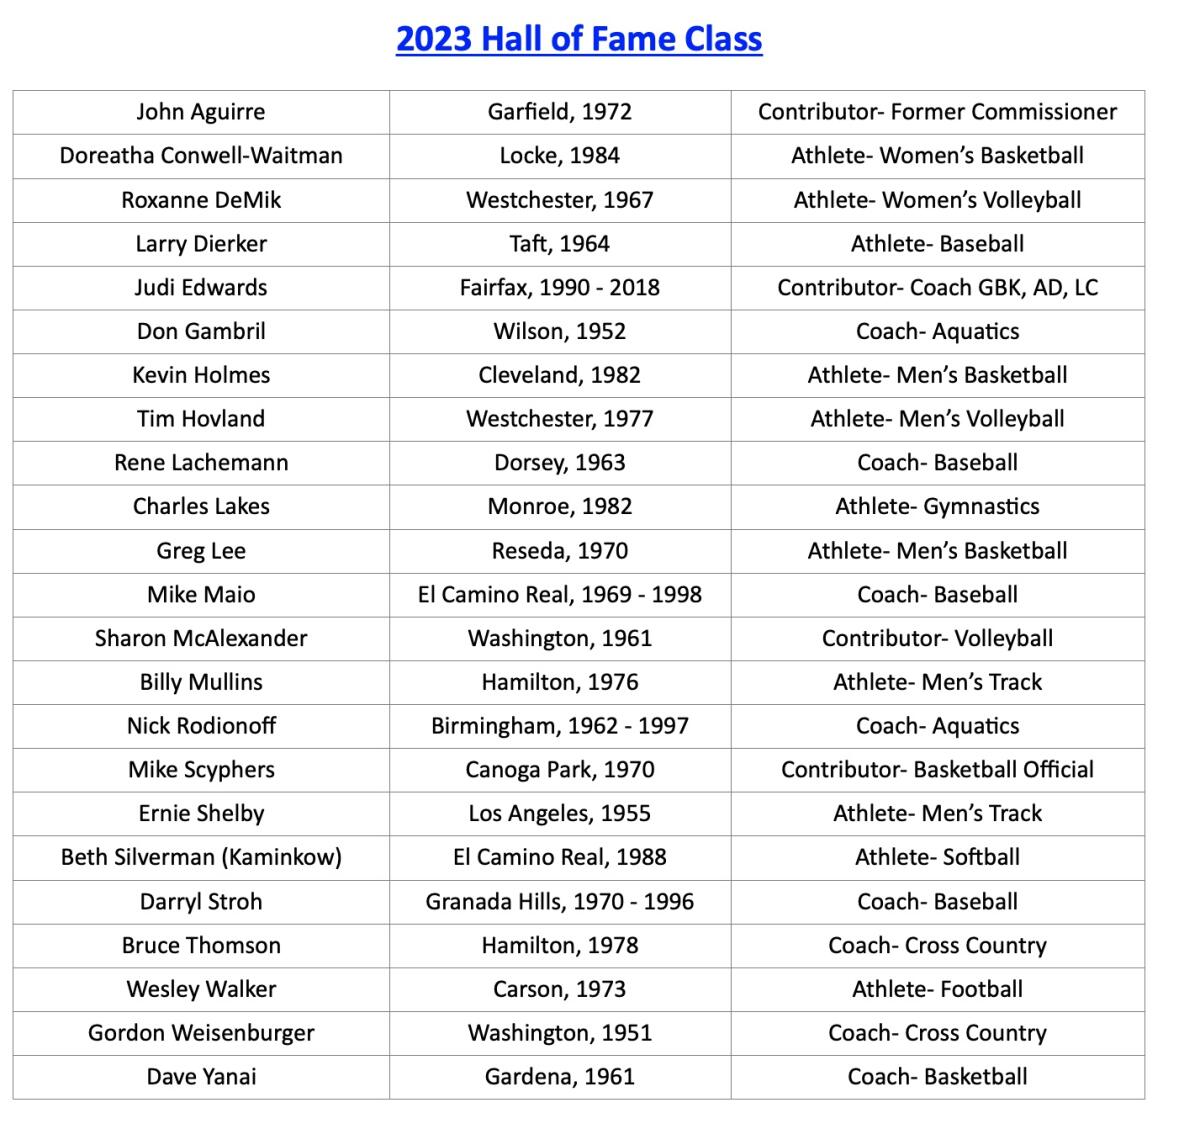 A list of the City Section Hall of Famers 